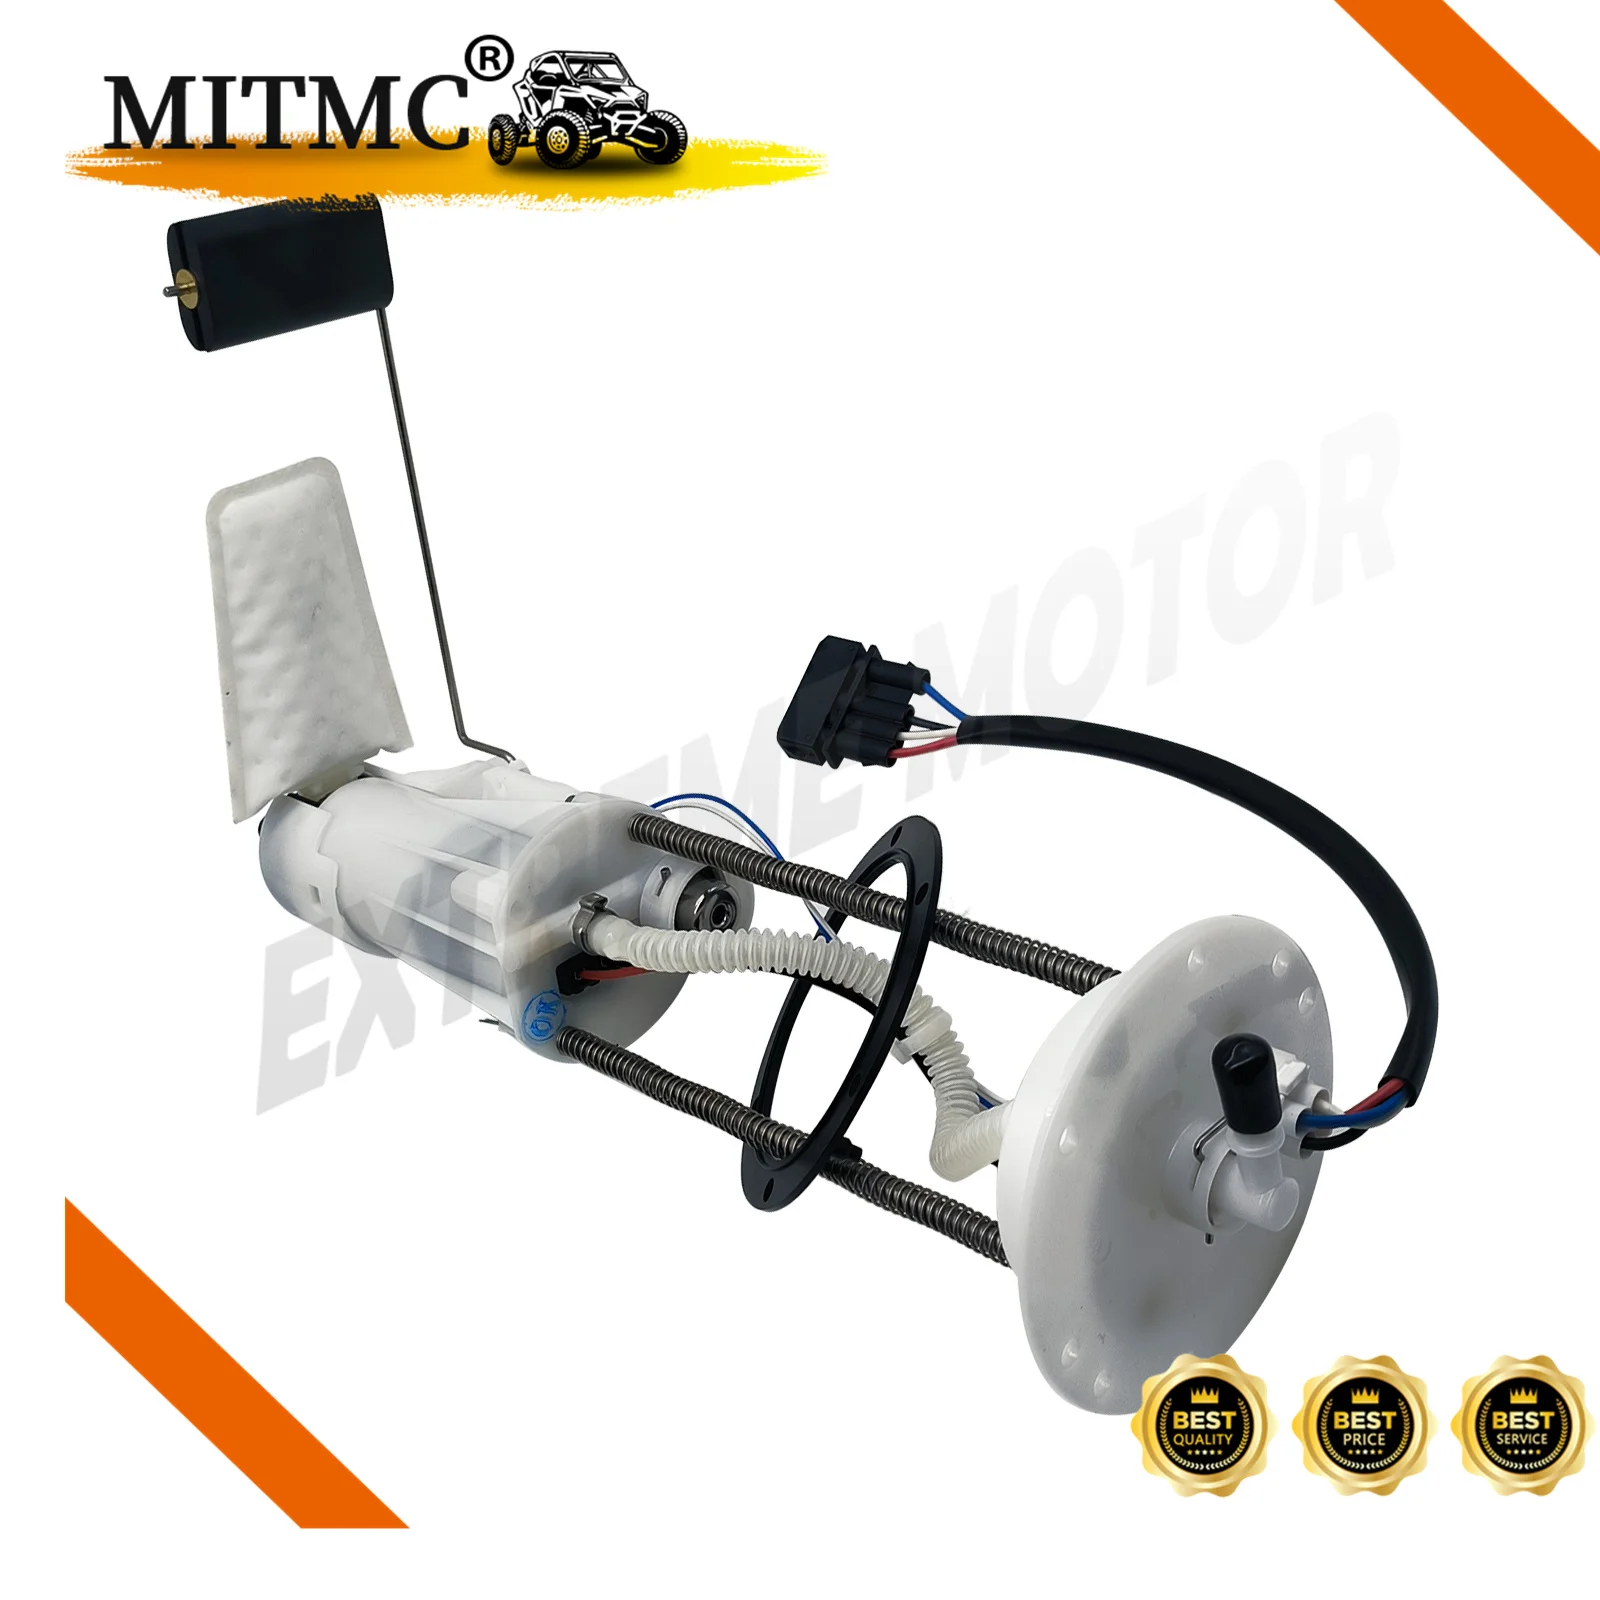 Fuel Pump Module Electronic Fuel Injection For ODES V-Twin 800 UTV ATV Dominator Raider Assail RM 0124508ant EFI 10904080001 48017 hqfp64 original new ic chip drive fuel injection module